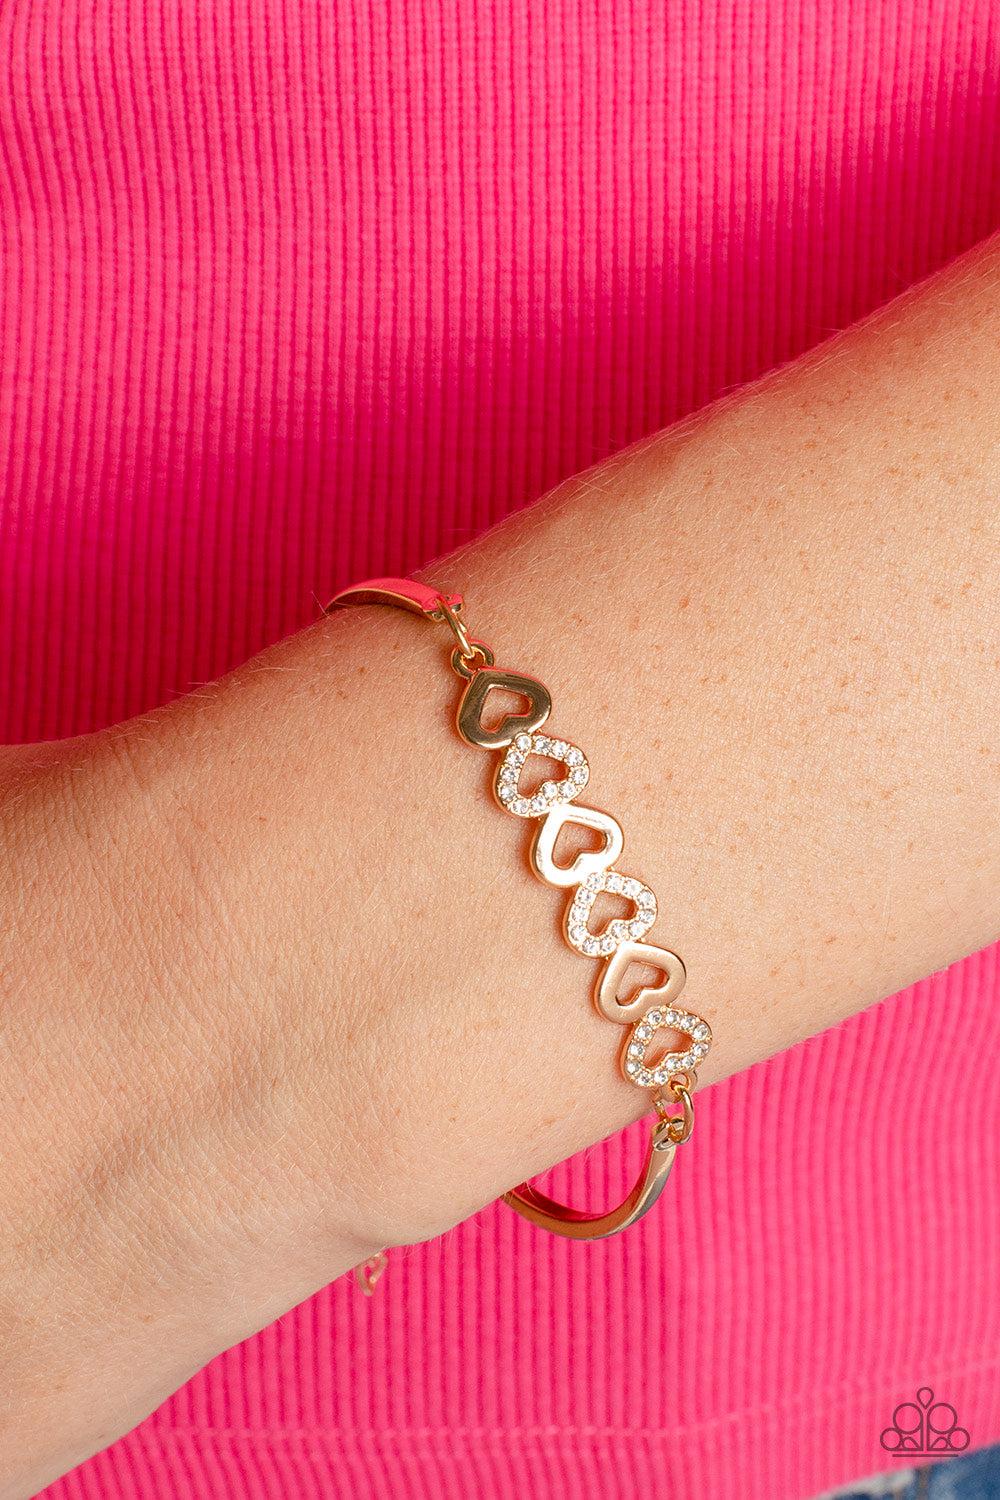 Attentive Admirer Gold Heart Bracelet - Paparazzi Accessories-on model - CarasShop.com - $5 Jewelry by Cara Jewels